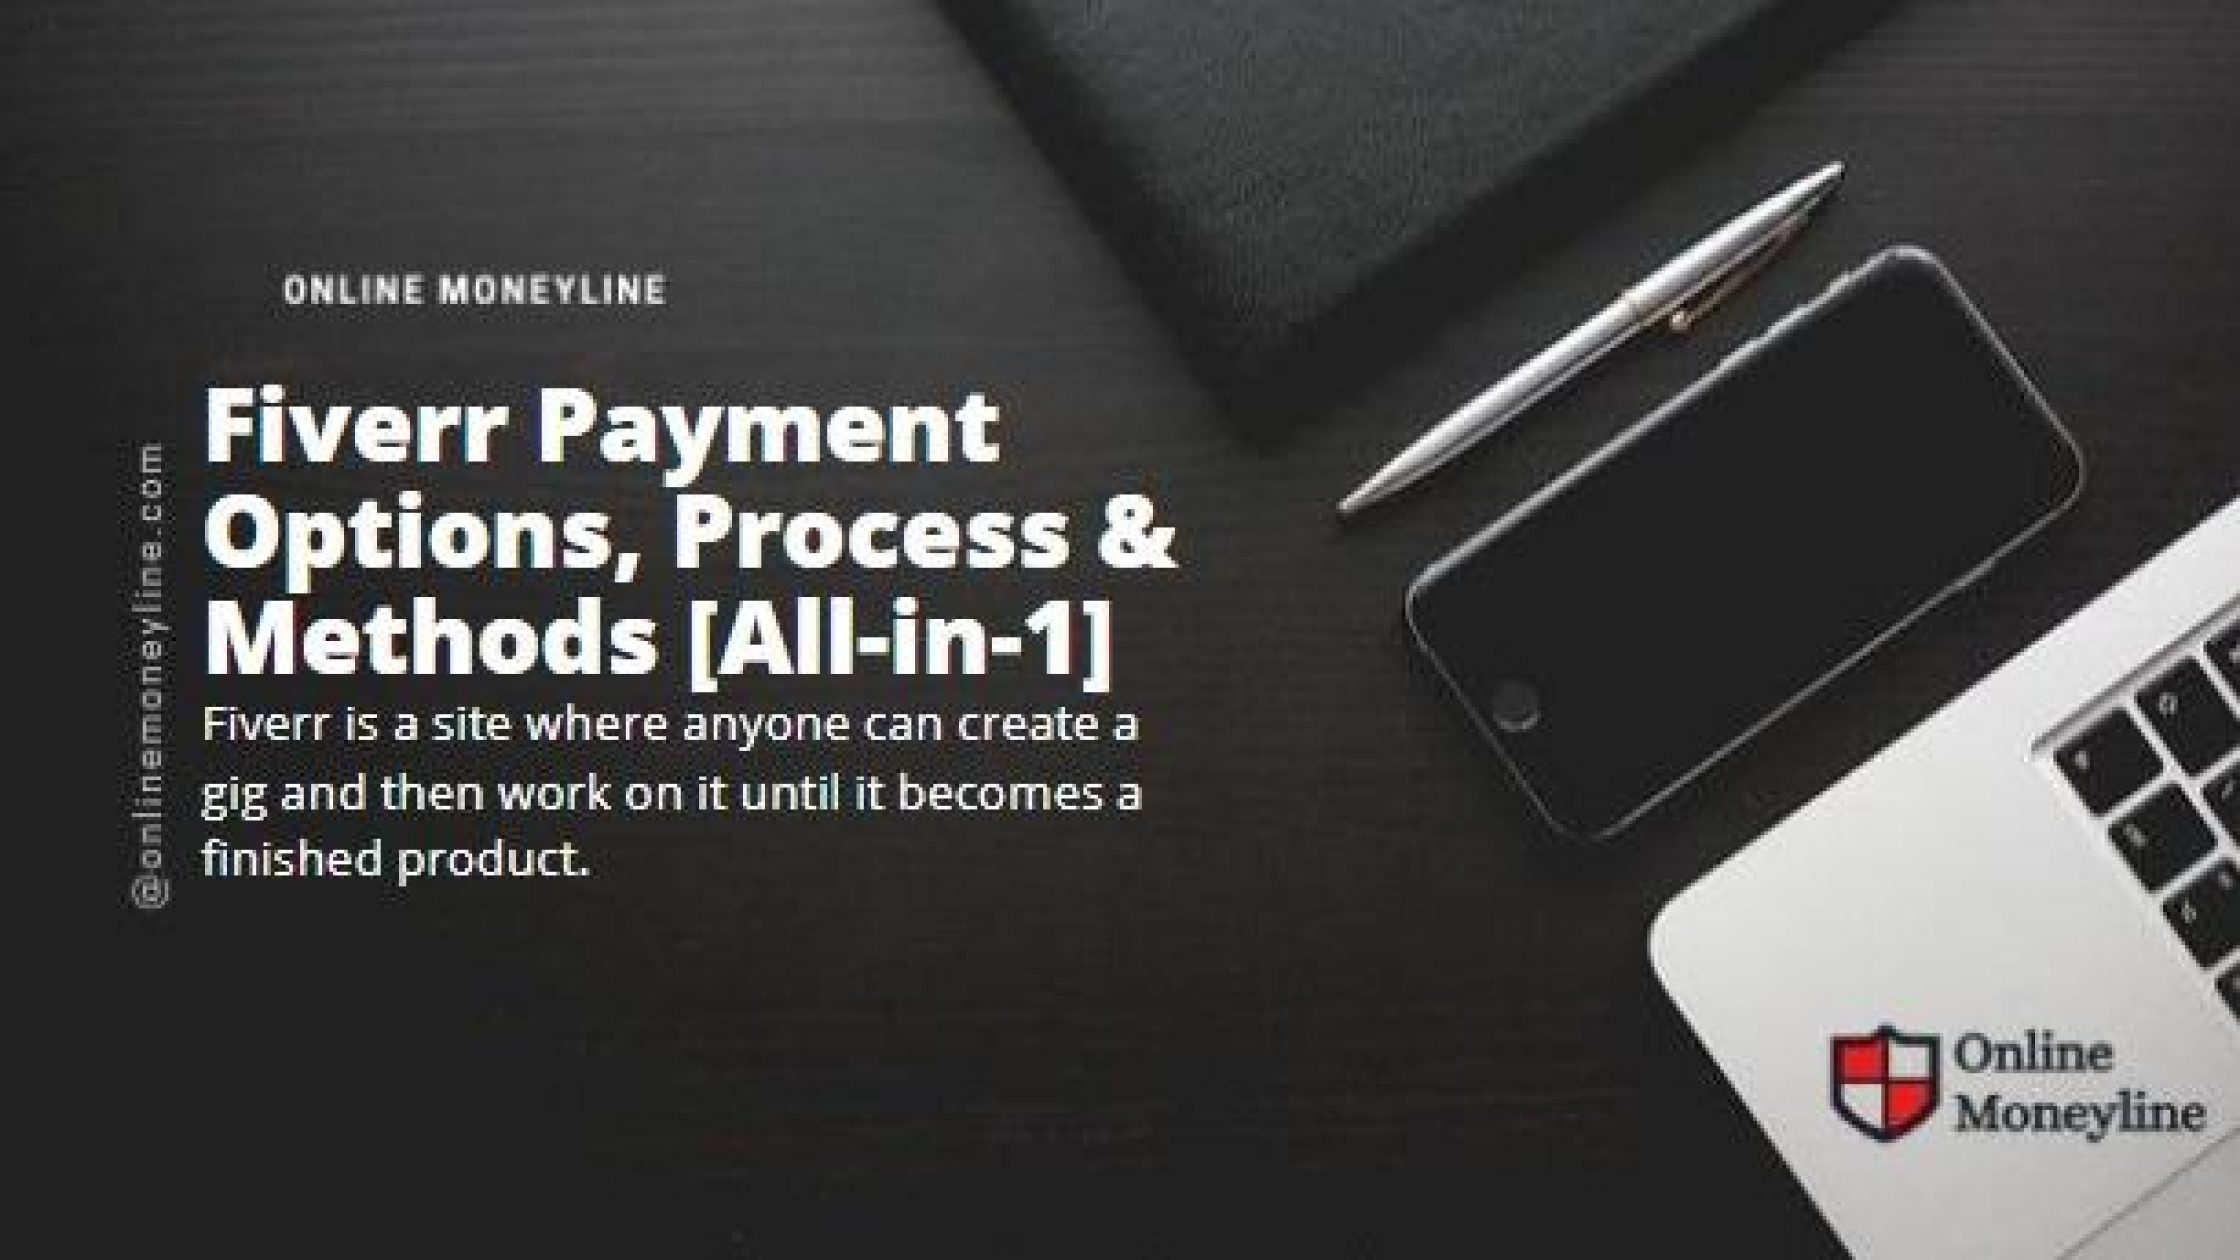 Fiverr Payment Options, Process & Methods [All-in-1]